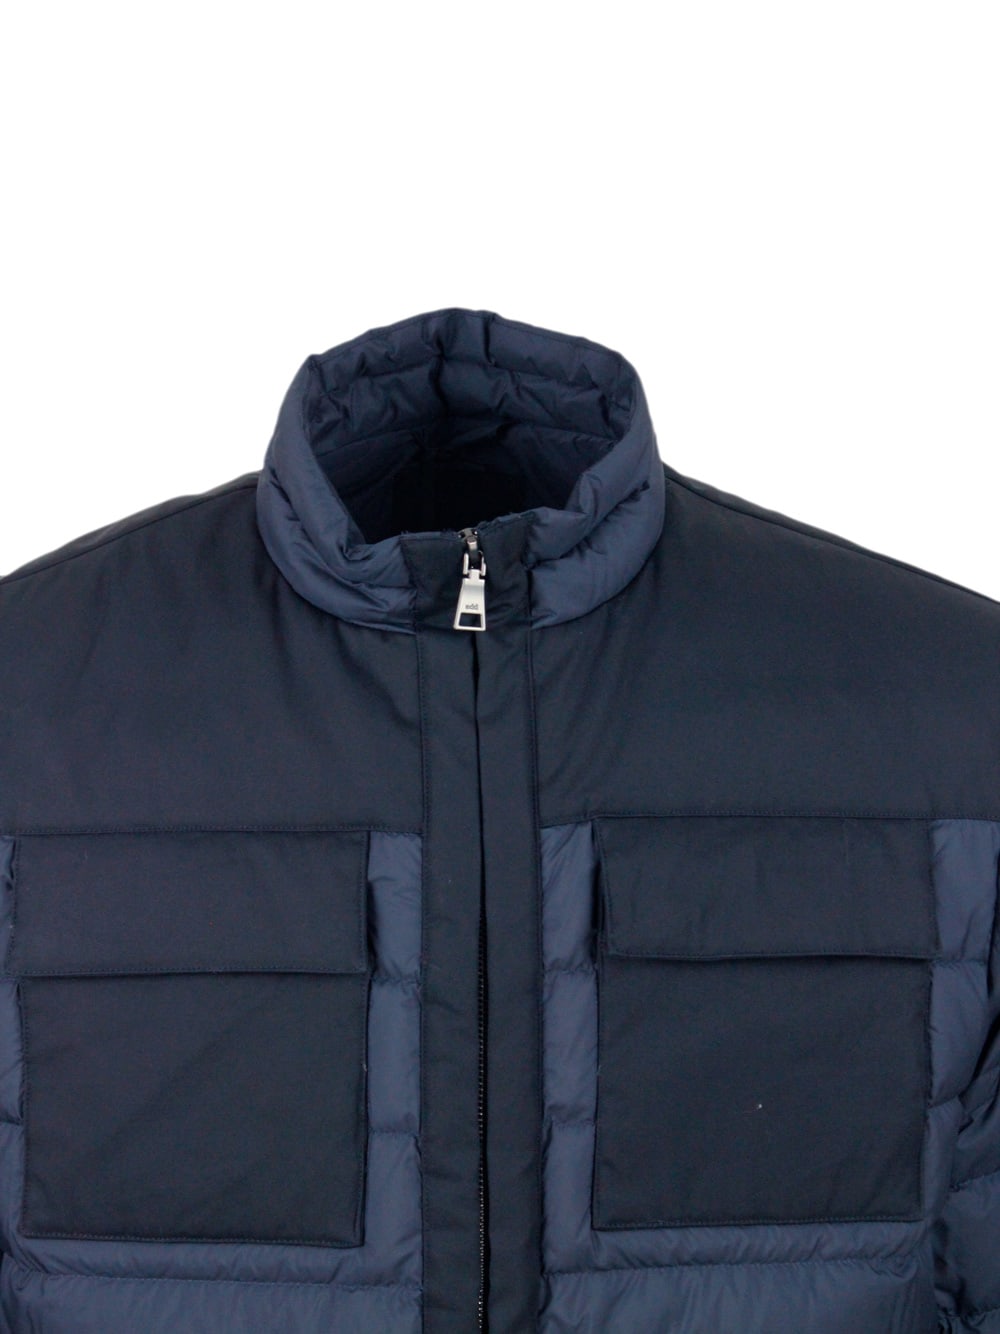 Shop Add 100 Gram Down Jacket With High Quality Feathers. Technical Fabric Details And Chest Pockets. The Clo In Dark Blu